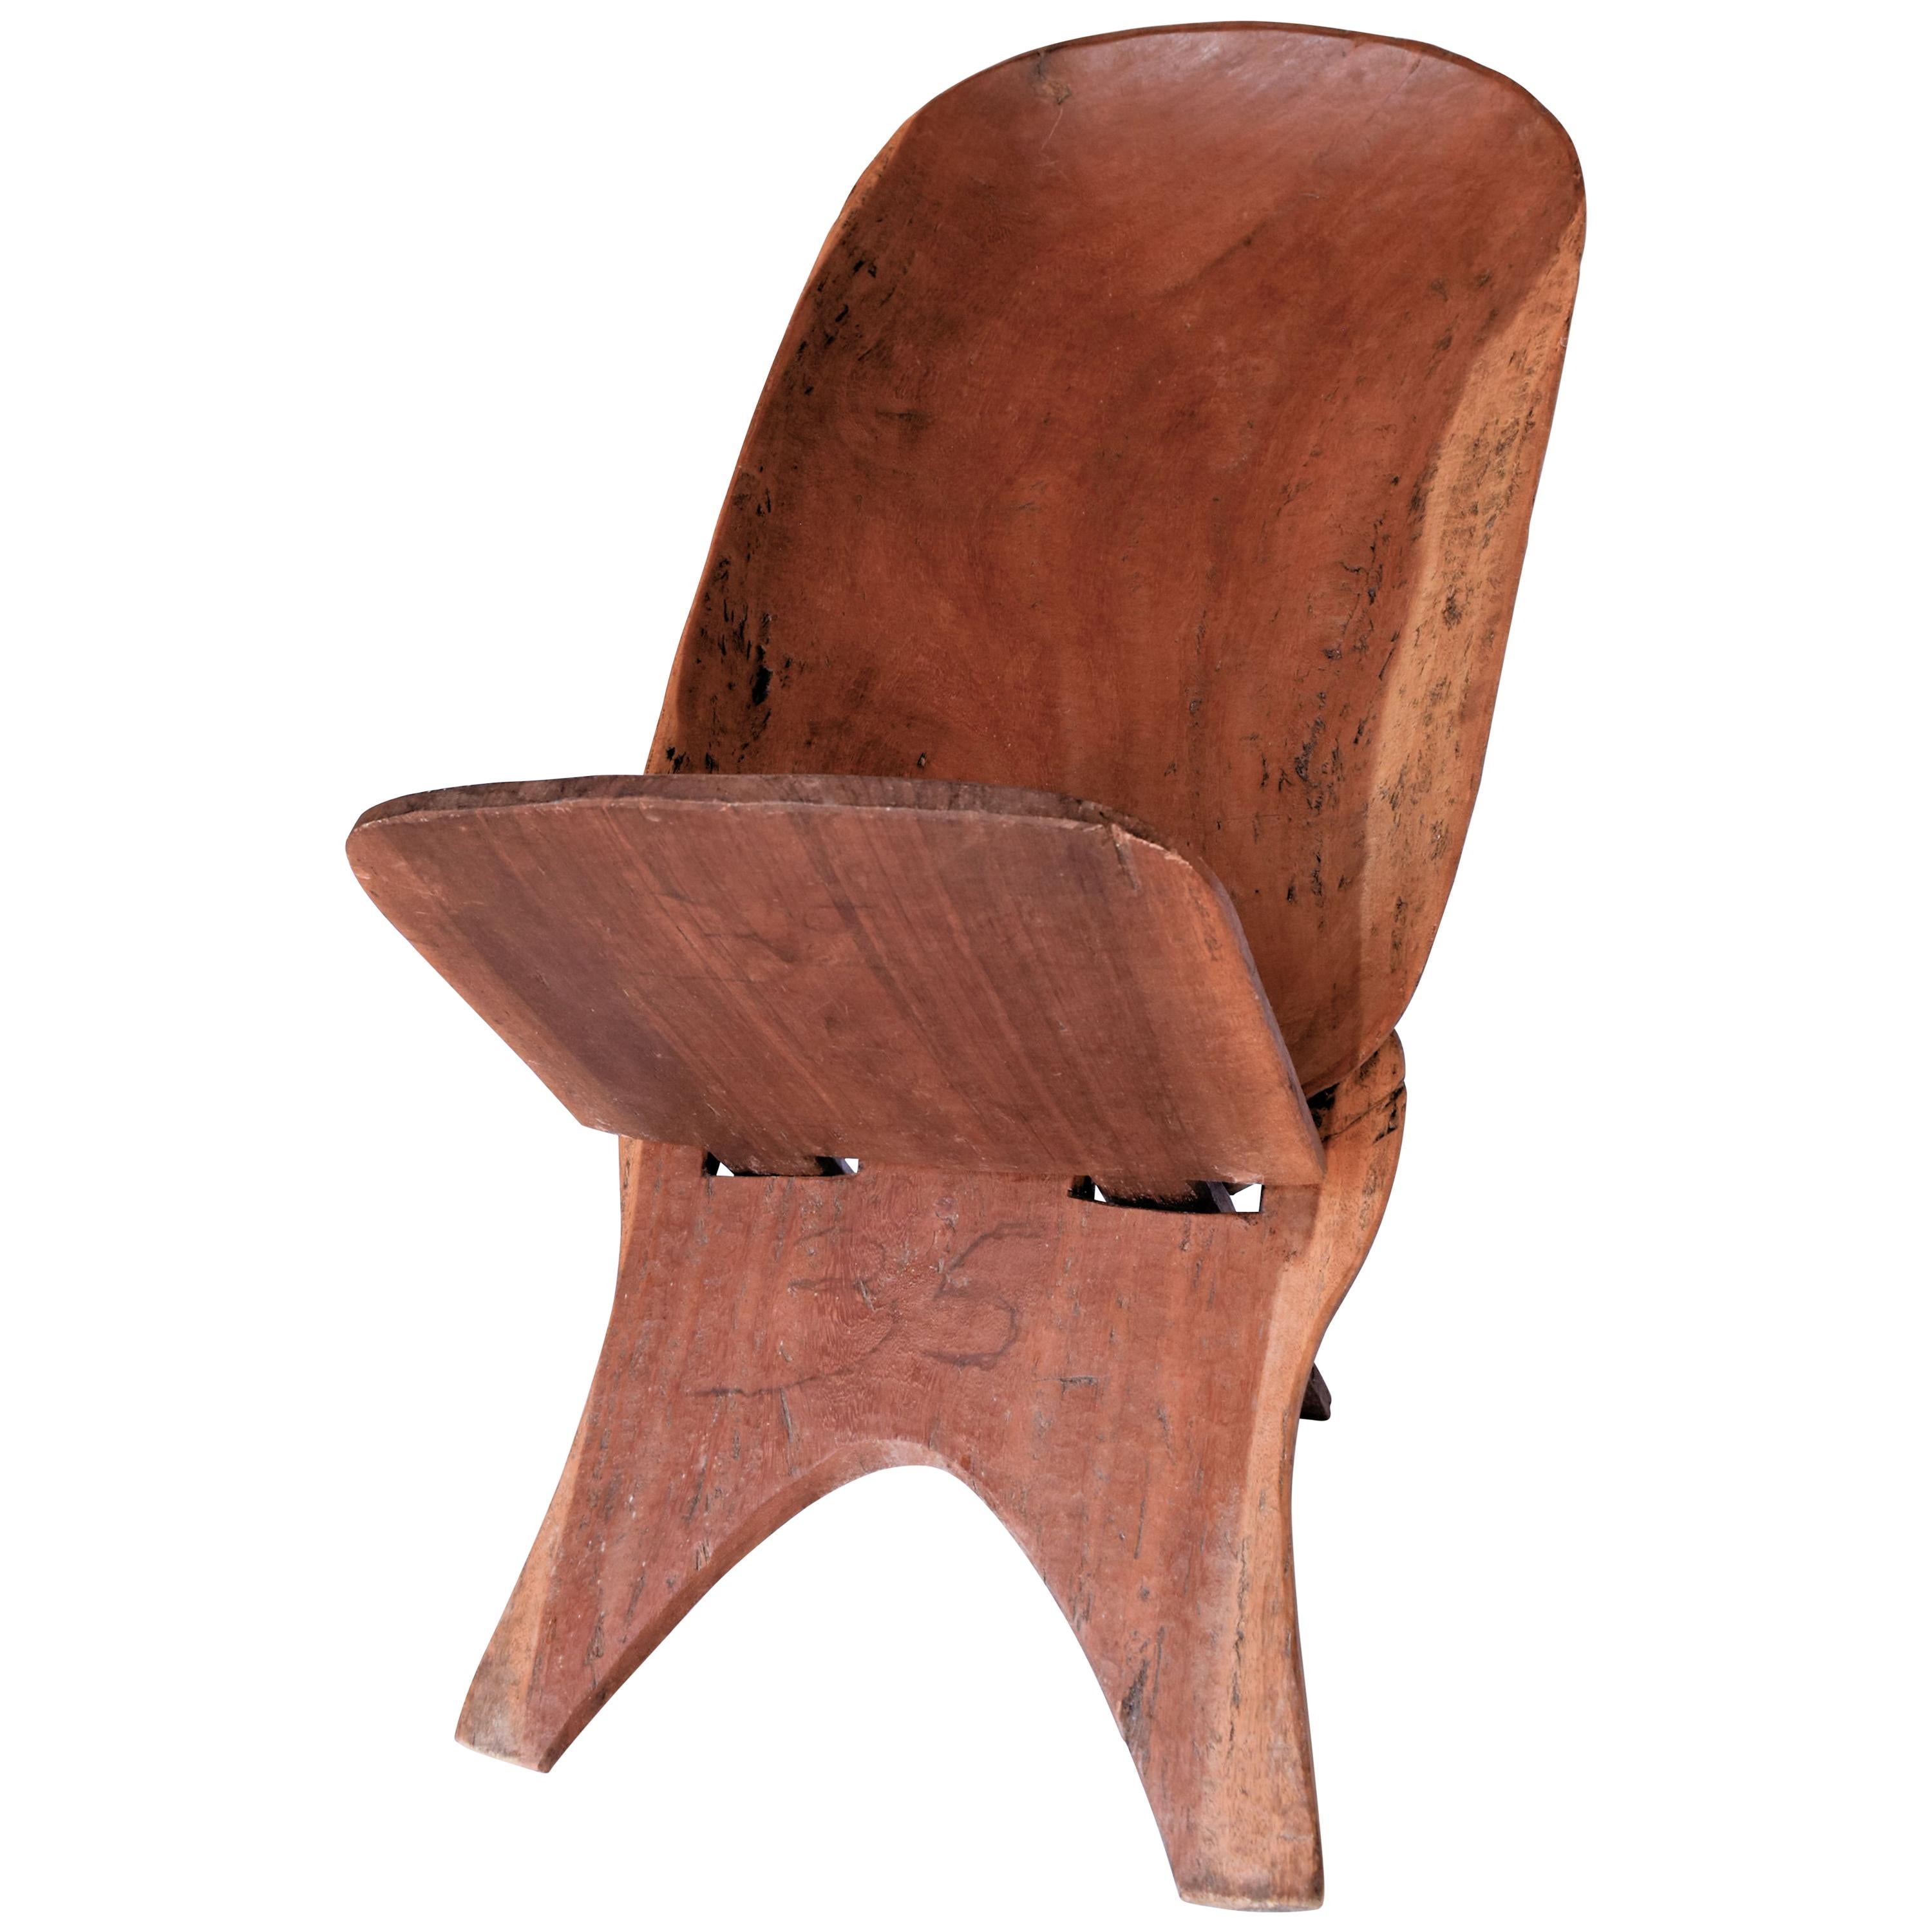 African Hand Carved Wooden Birthing Chair, 2 Piece